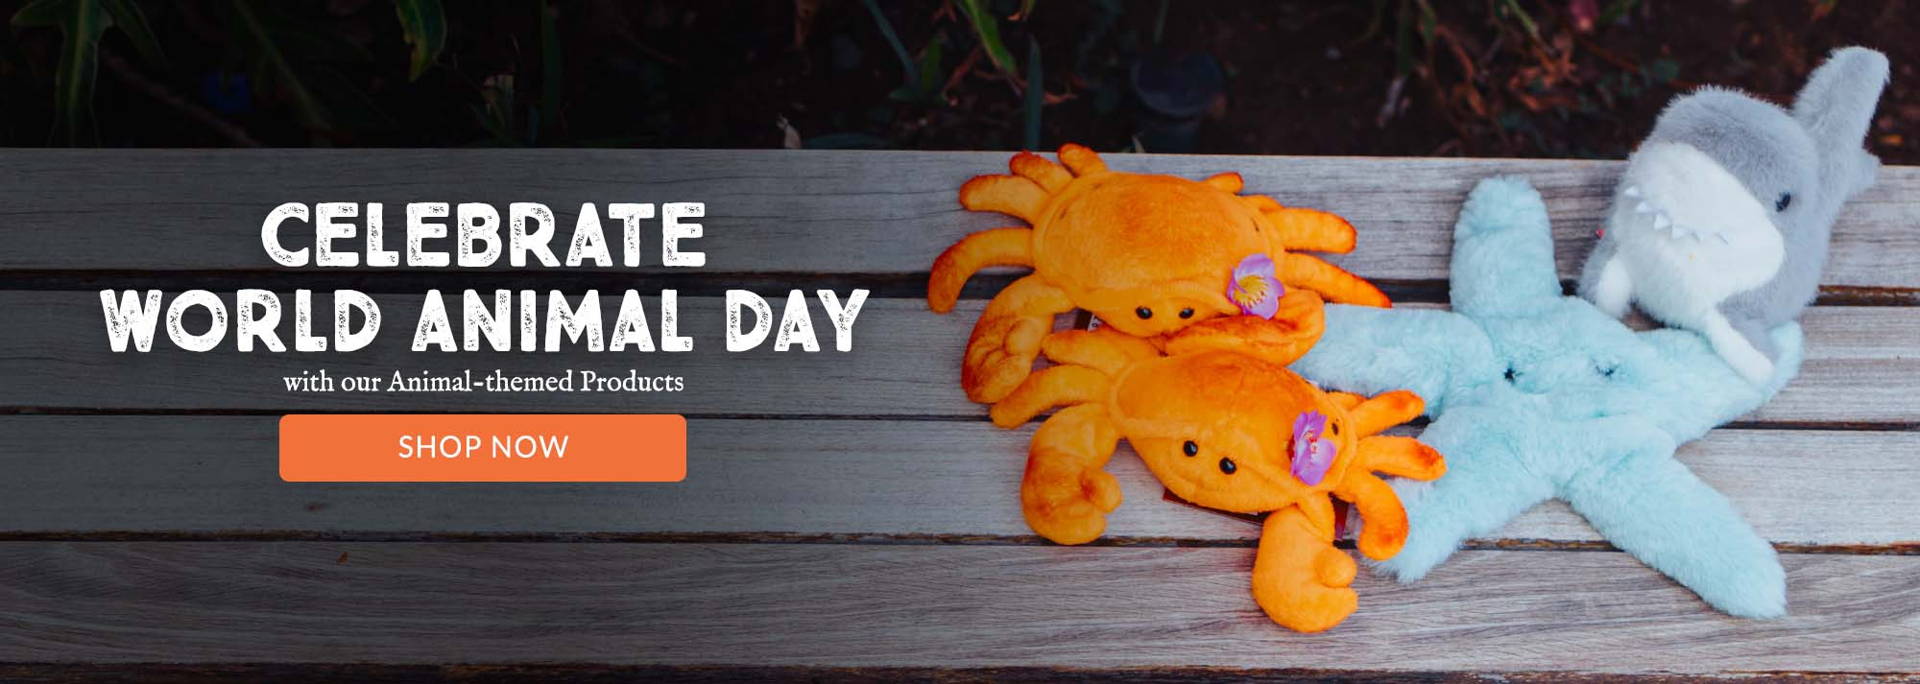 Celebrate World Animal Day with our Animal-themed Products